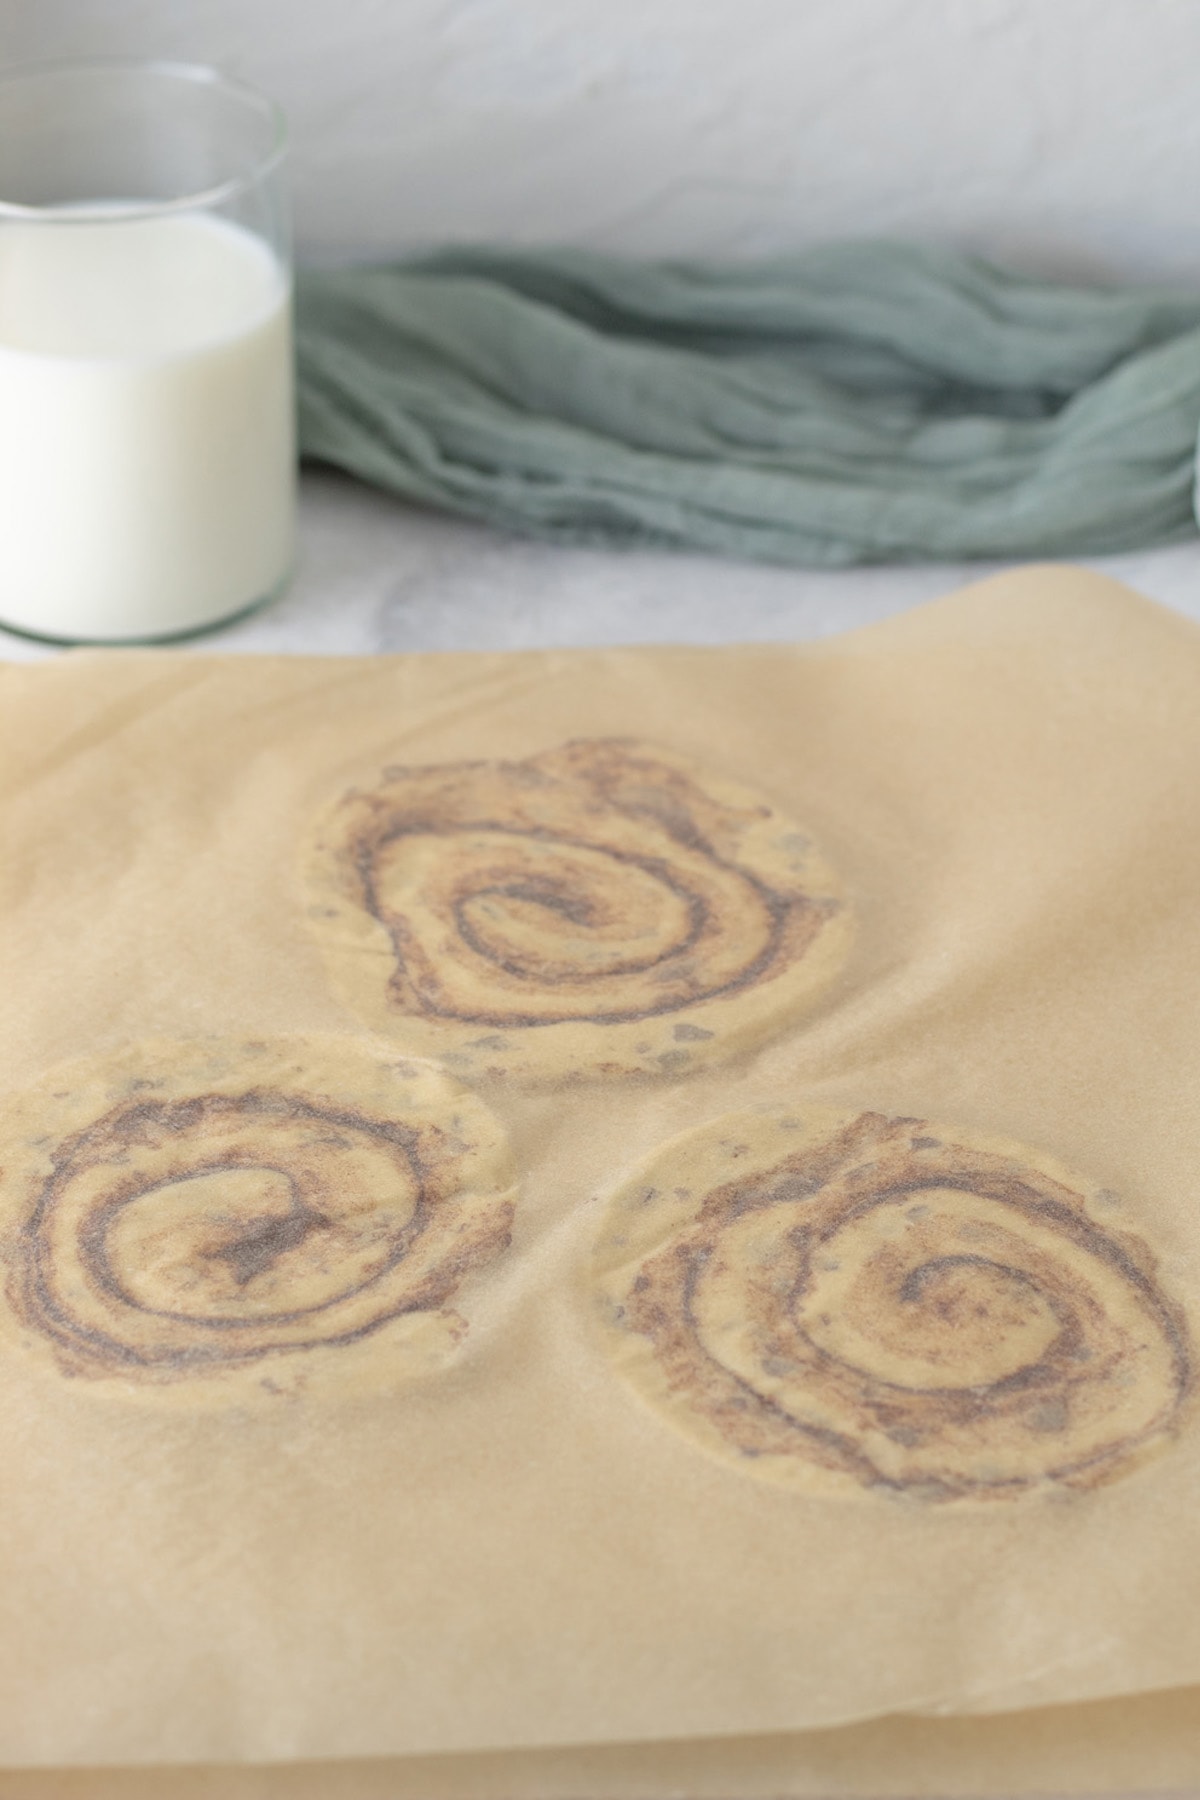 Roll out each cinnamon roll with a rolling pin until flattened out